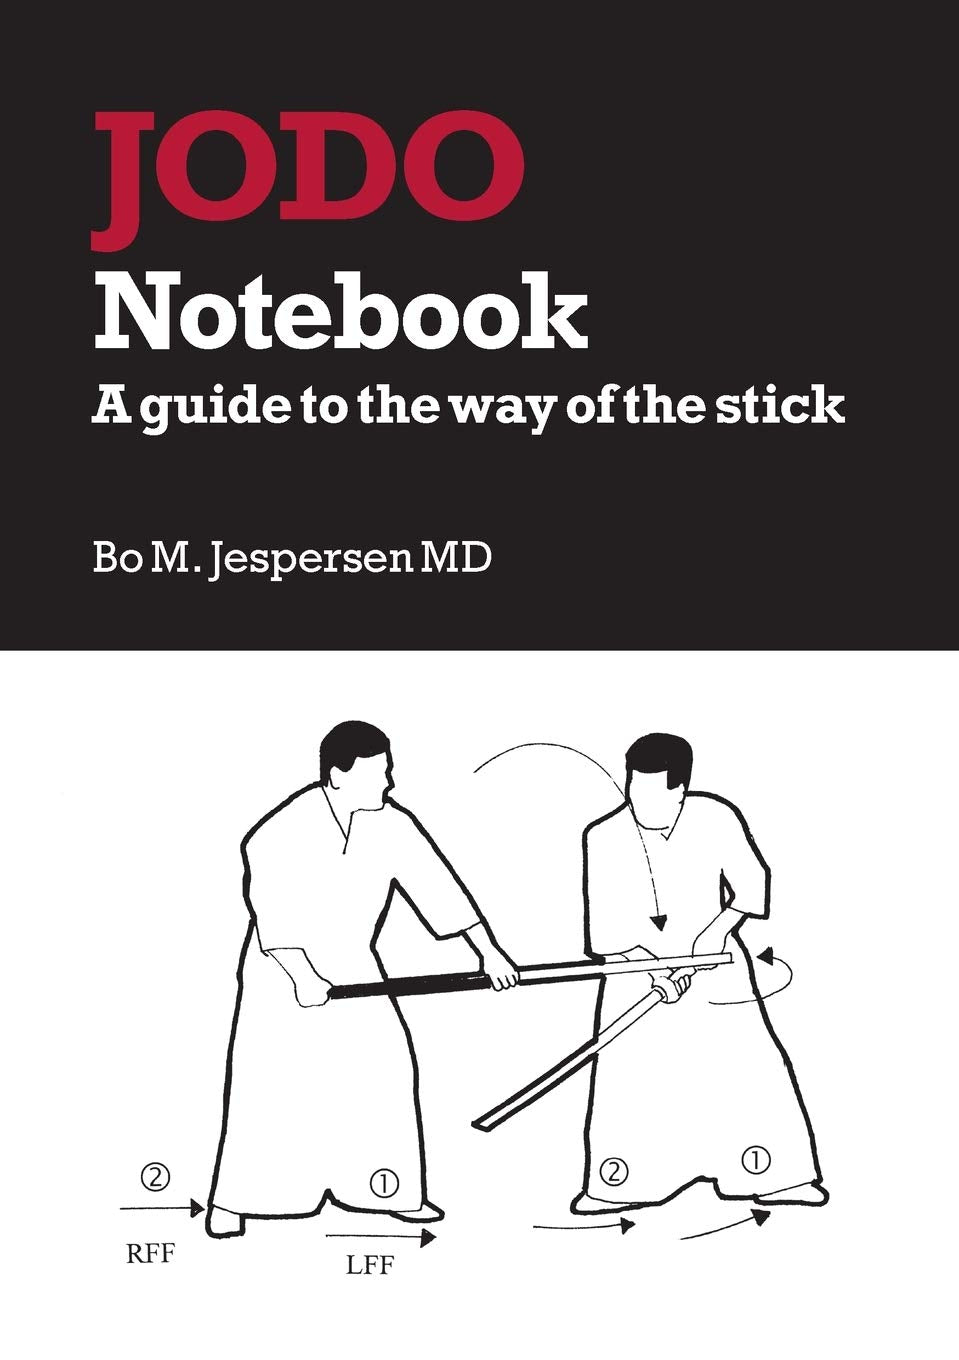 Jodo Notebook: A guide to the way of the stick book by Jo Jespersen (Preowned) - Budovideos